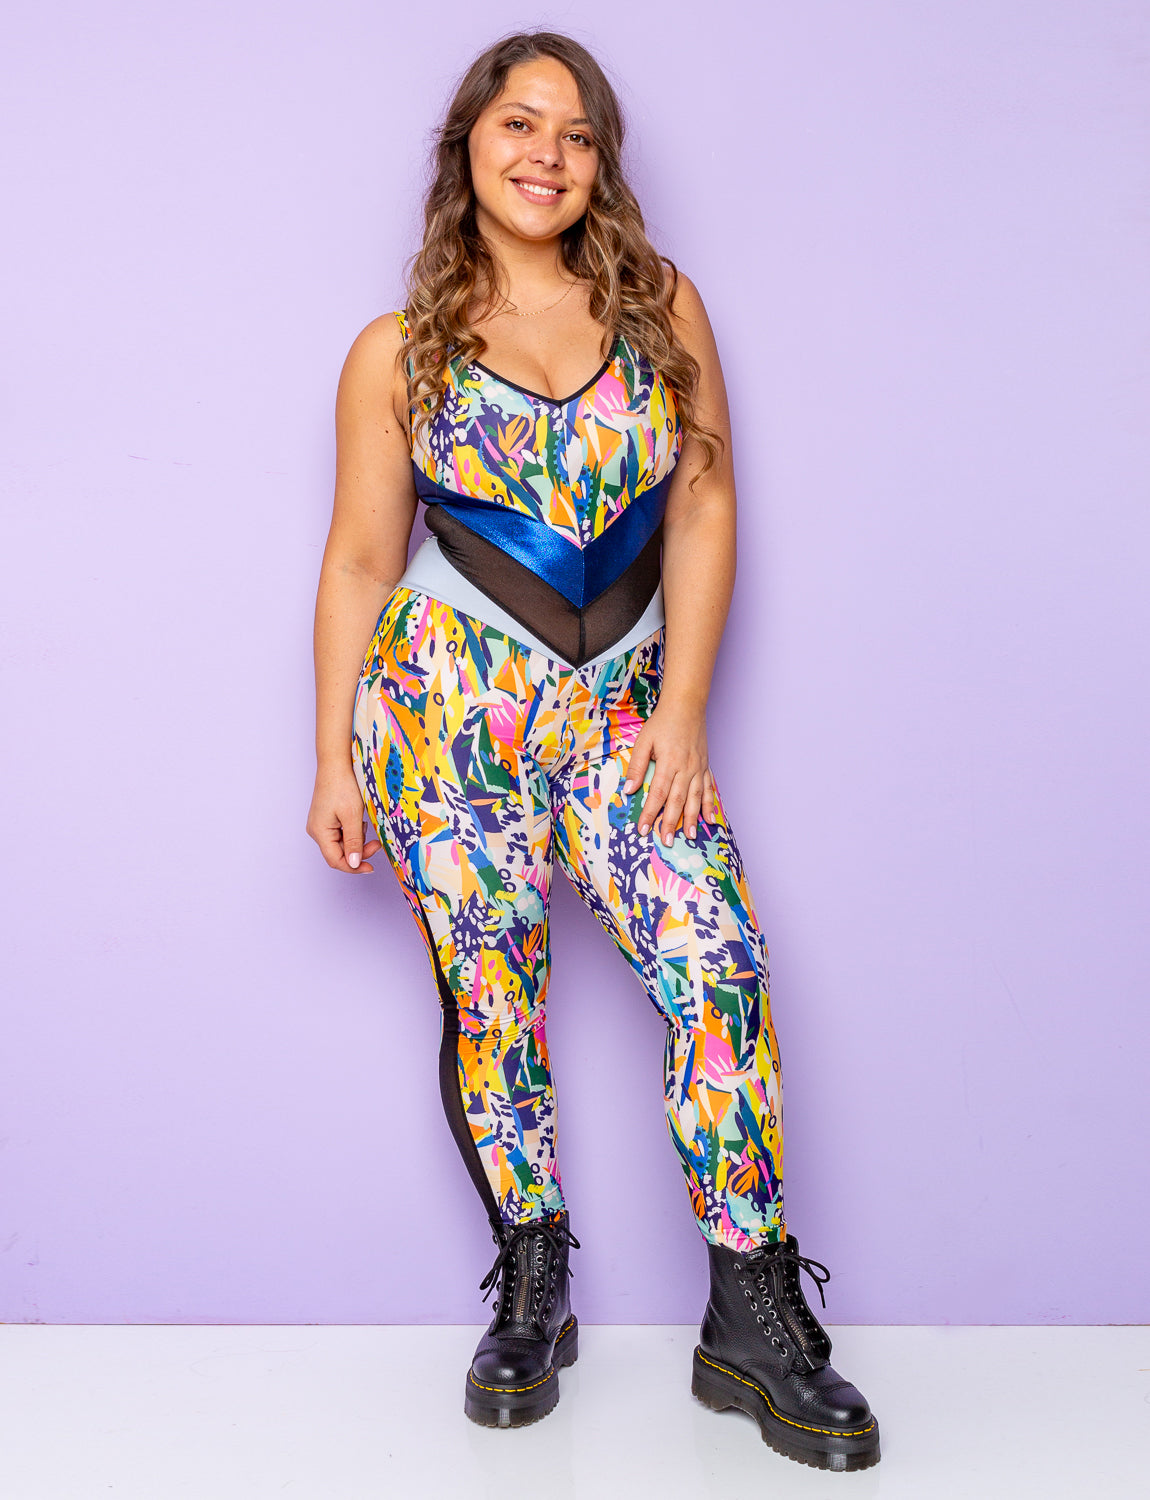 Woman modelling a jungle print lycra catsuit with contrasting waist panels.